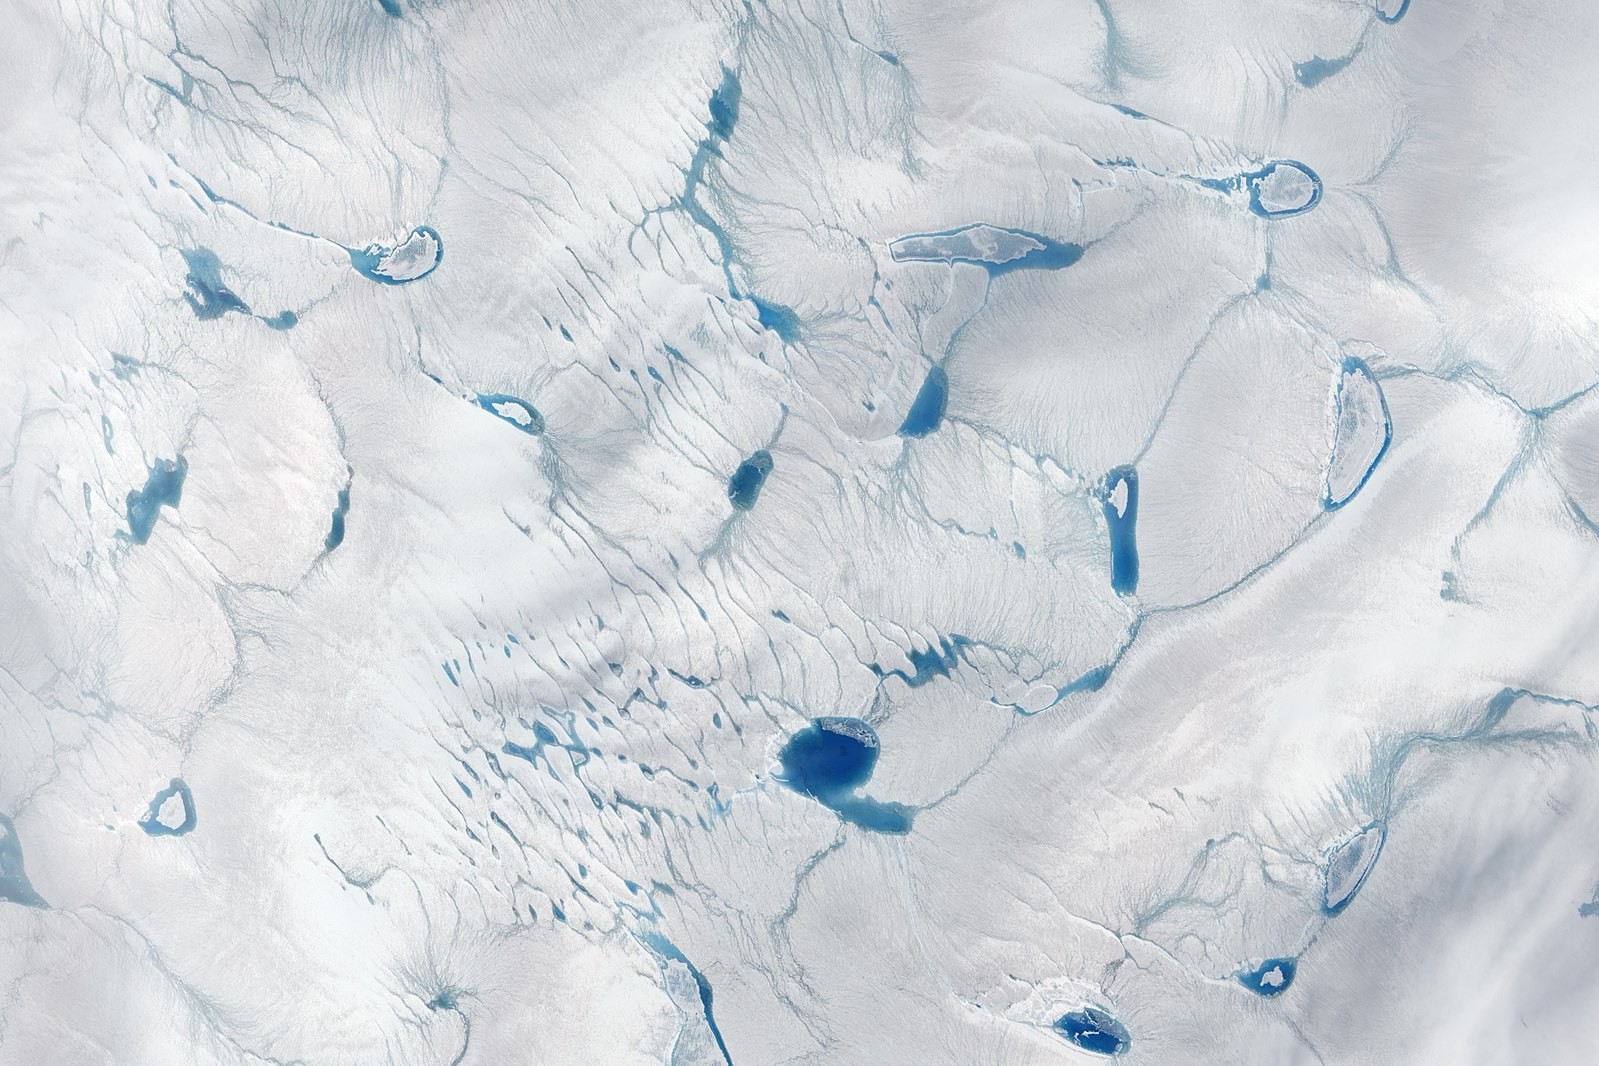 Surface melting on the Greenland Ice Sheet in June 2016. (Image: Jesse Allen/NASA Earth Observatory)